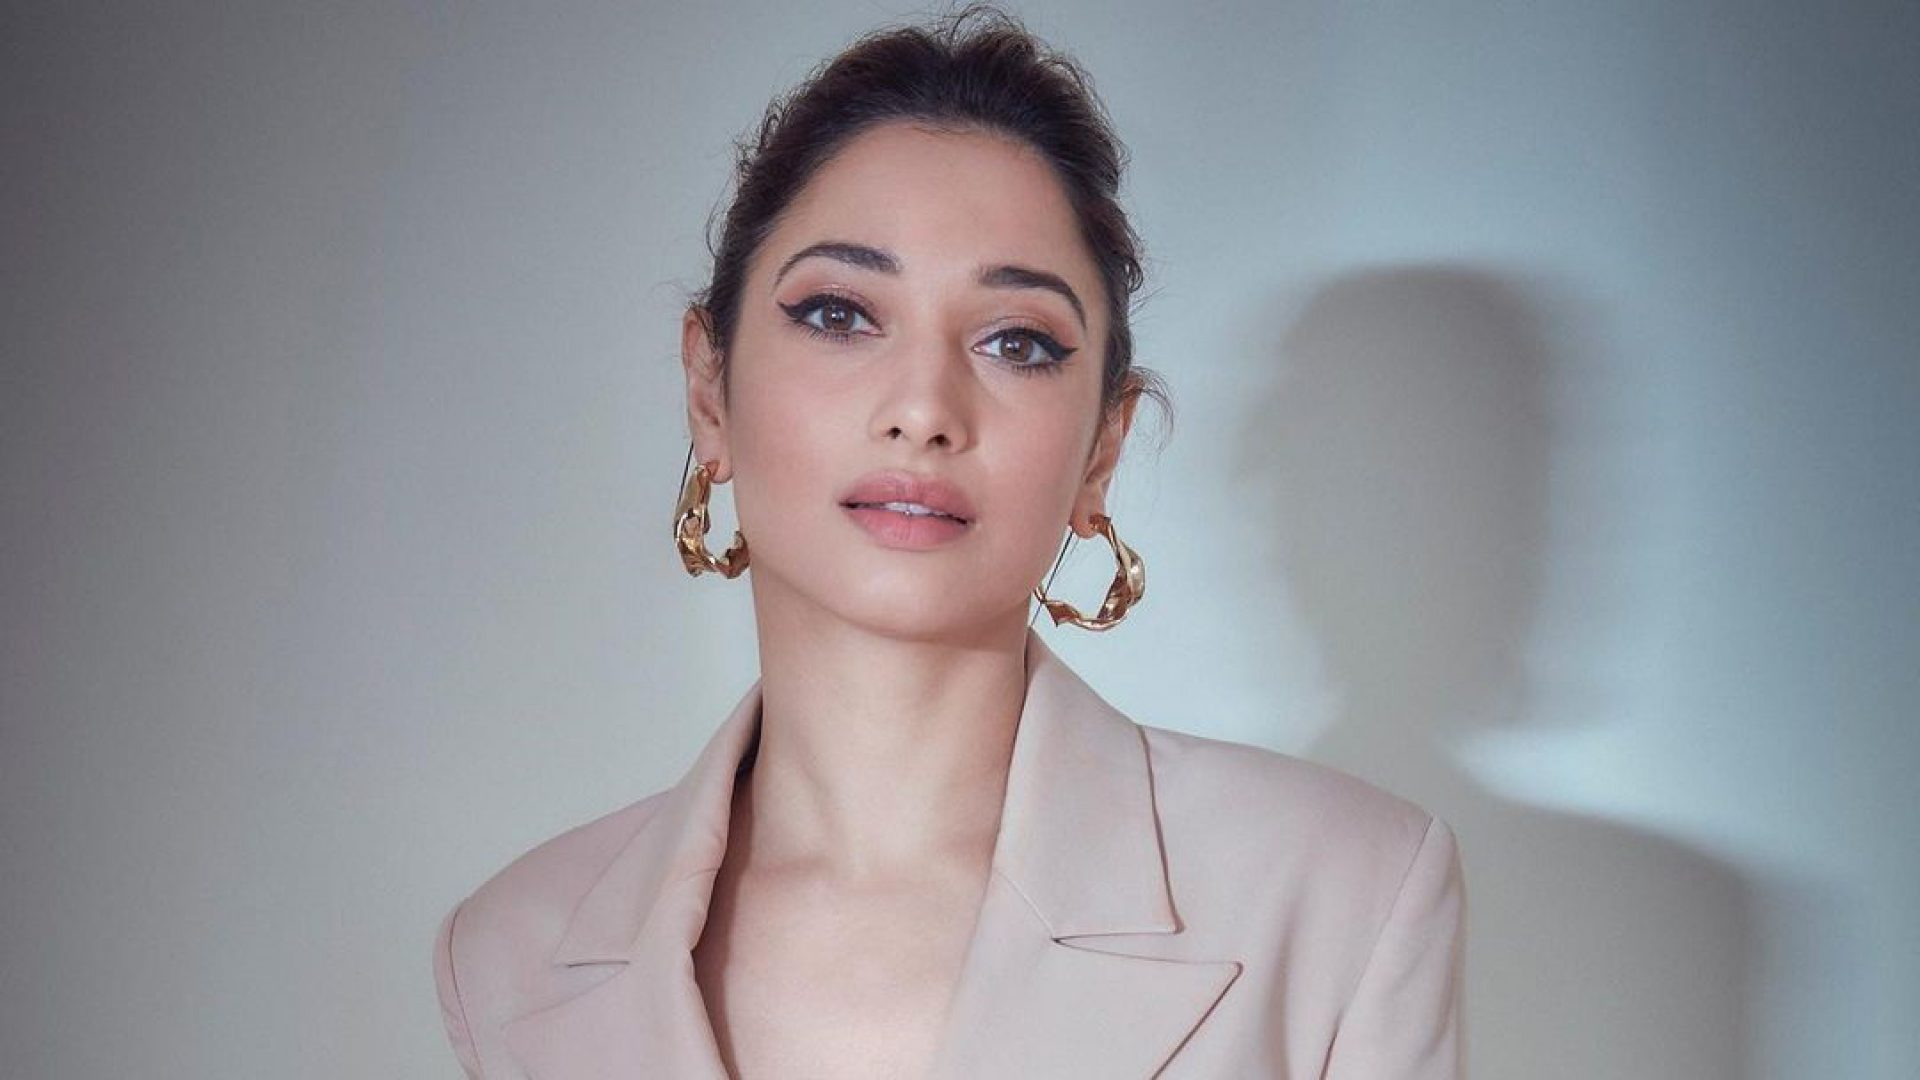 Tamannaah Bhatia reveals her DIY beauty tips using common household items in a Vogue video